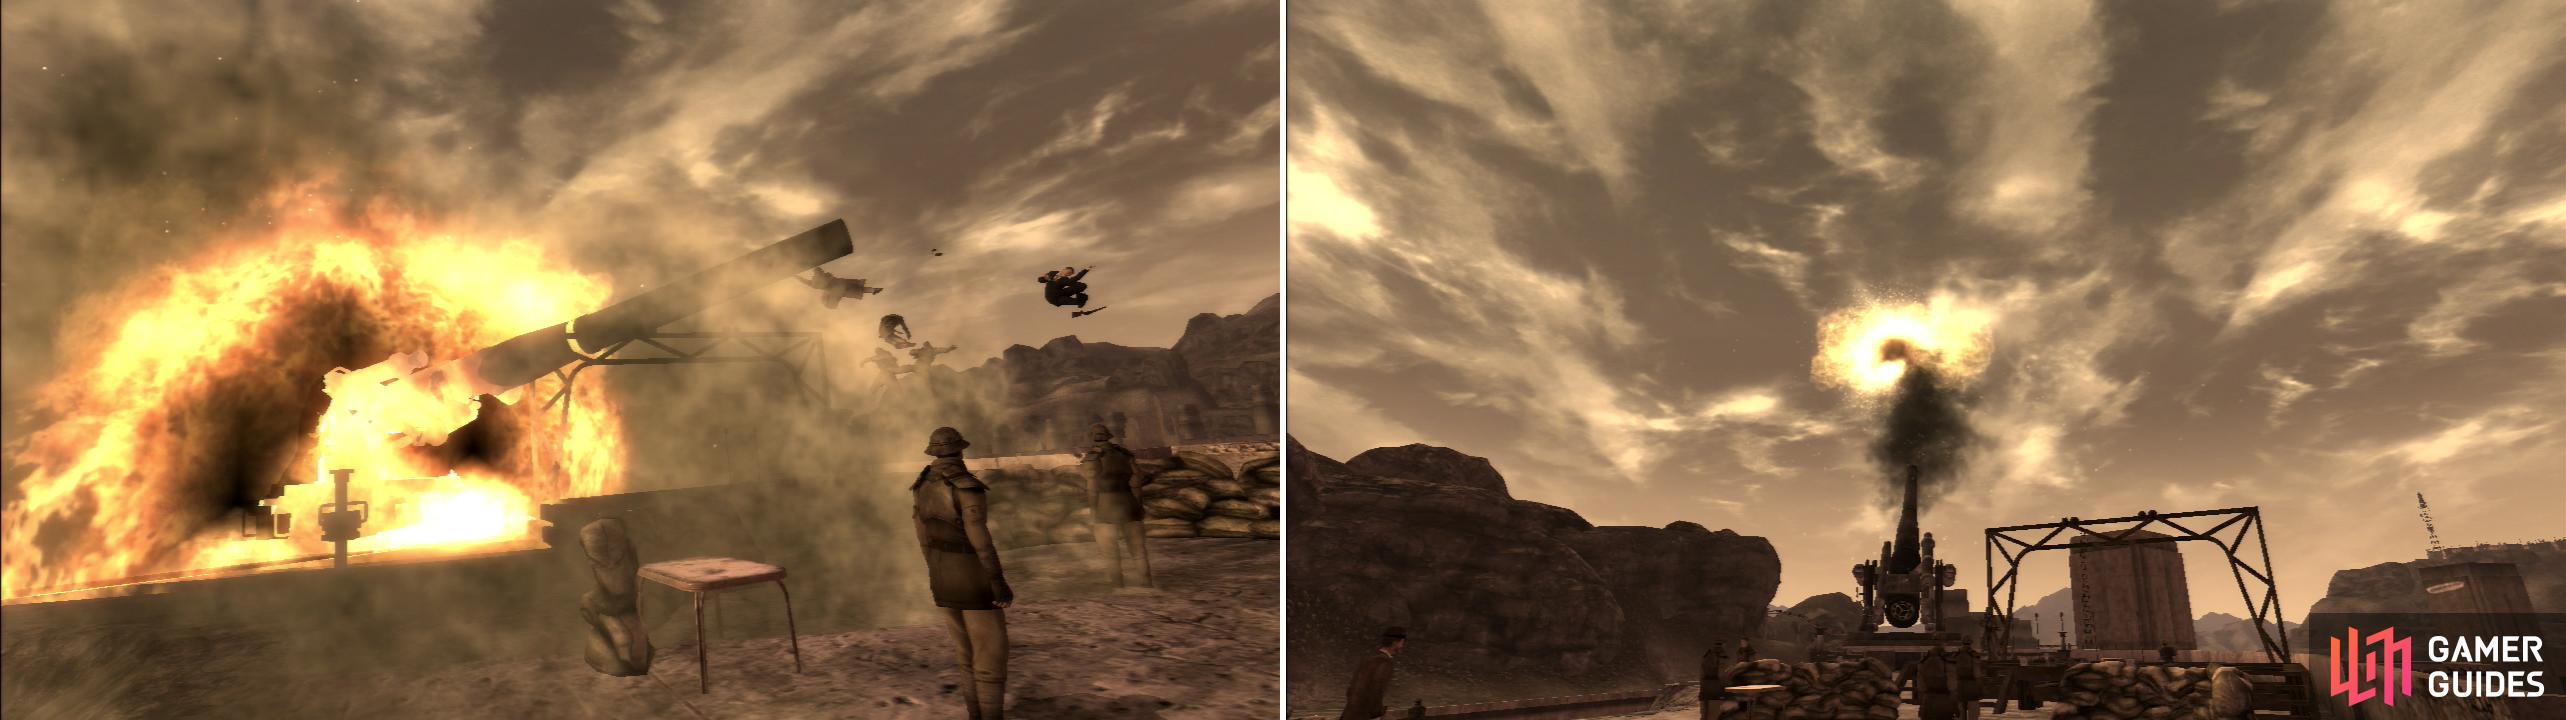 Sabotage the anti-aircraft gun to rig it to explode during the President’s speech (see him flying through the air on the right side of the left photo? That’s one dead bear!) (left). You can also activate the gun, which will cause it to shoot down the President’s vertibird (right).